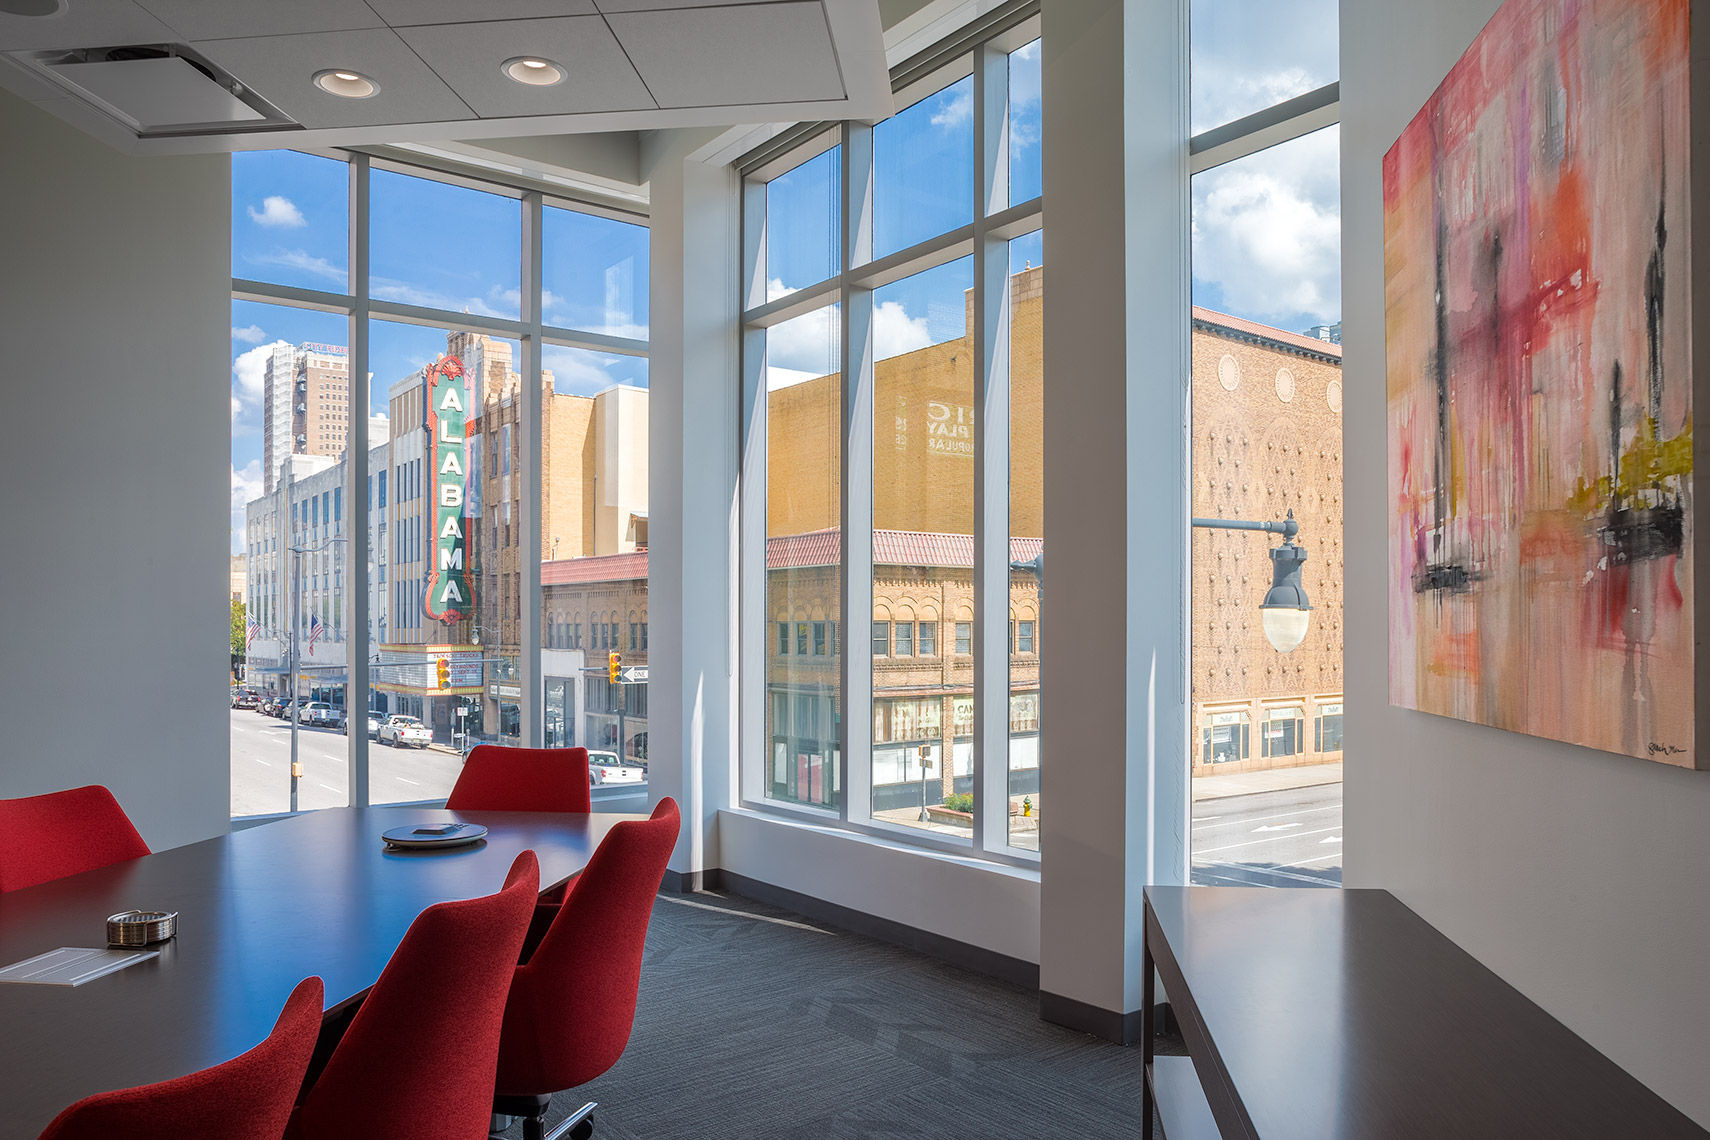 Meeting room and city view in Birmingham, Alabama